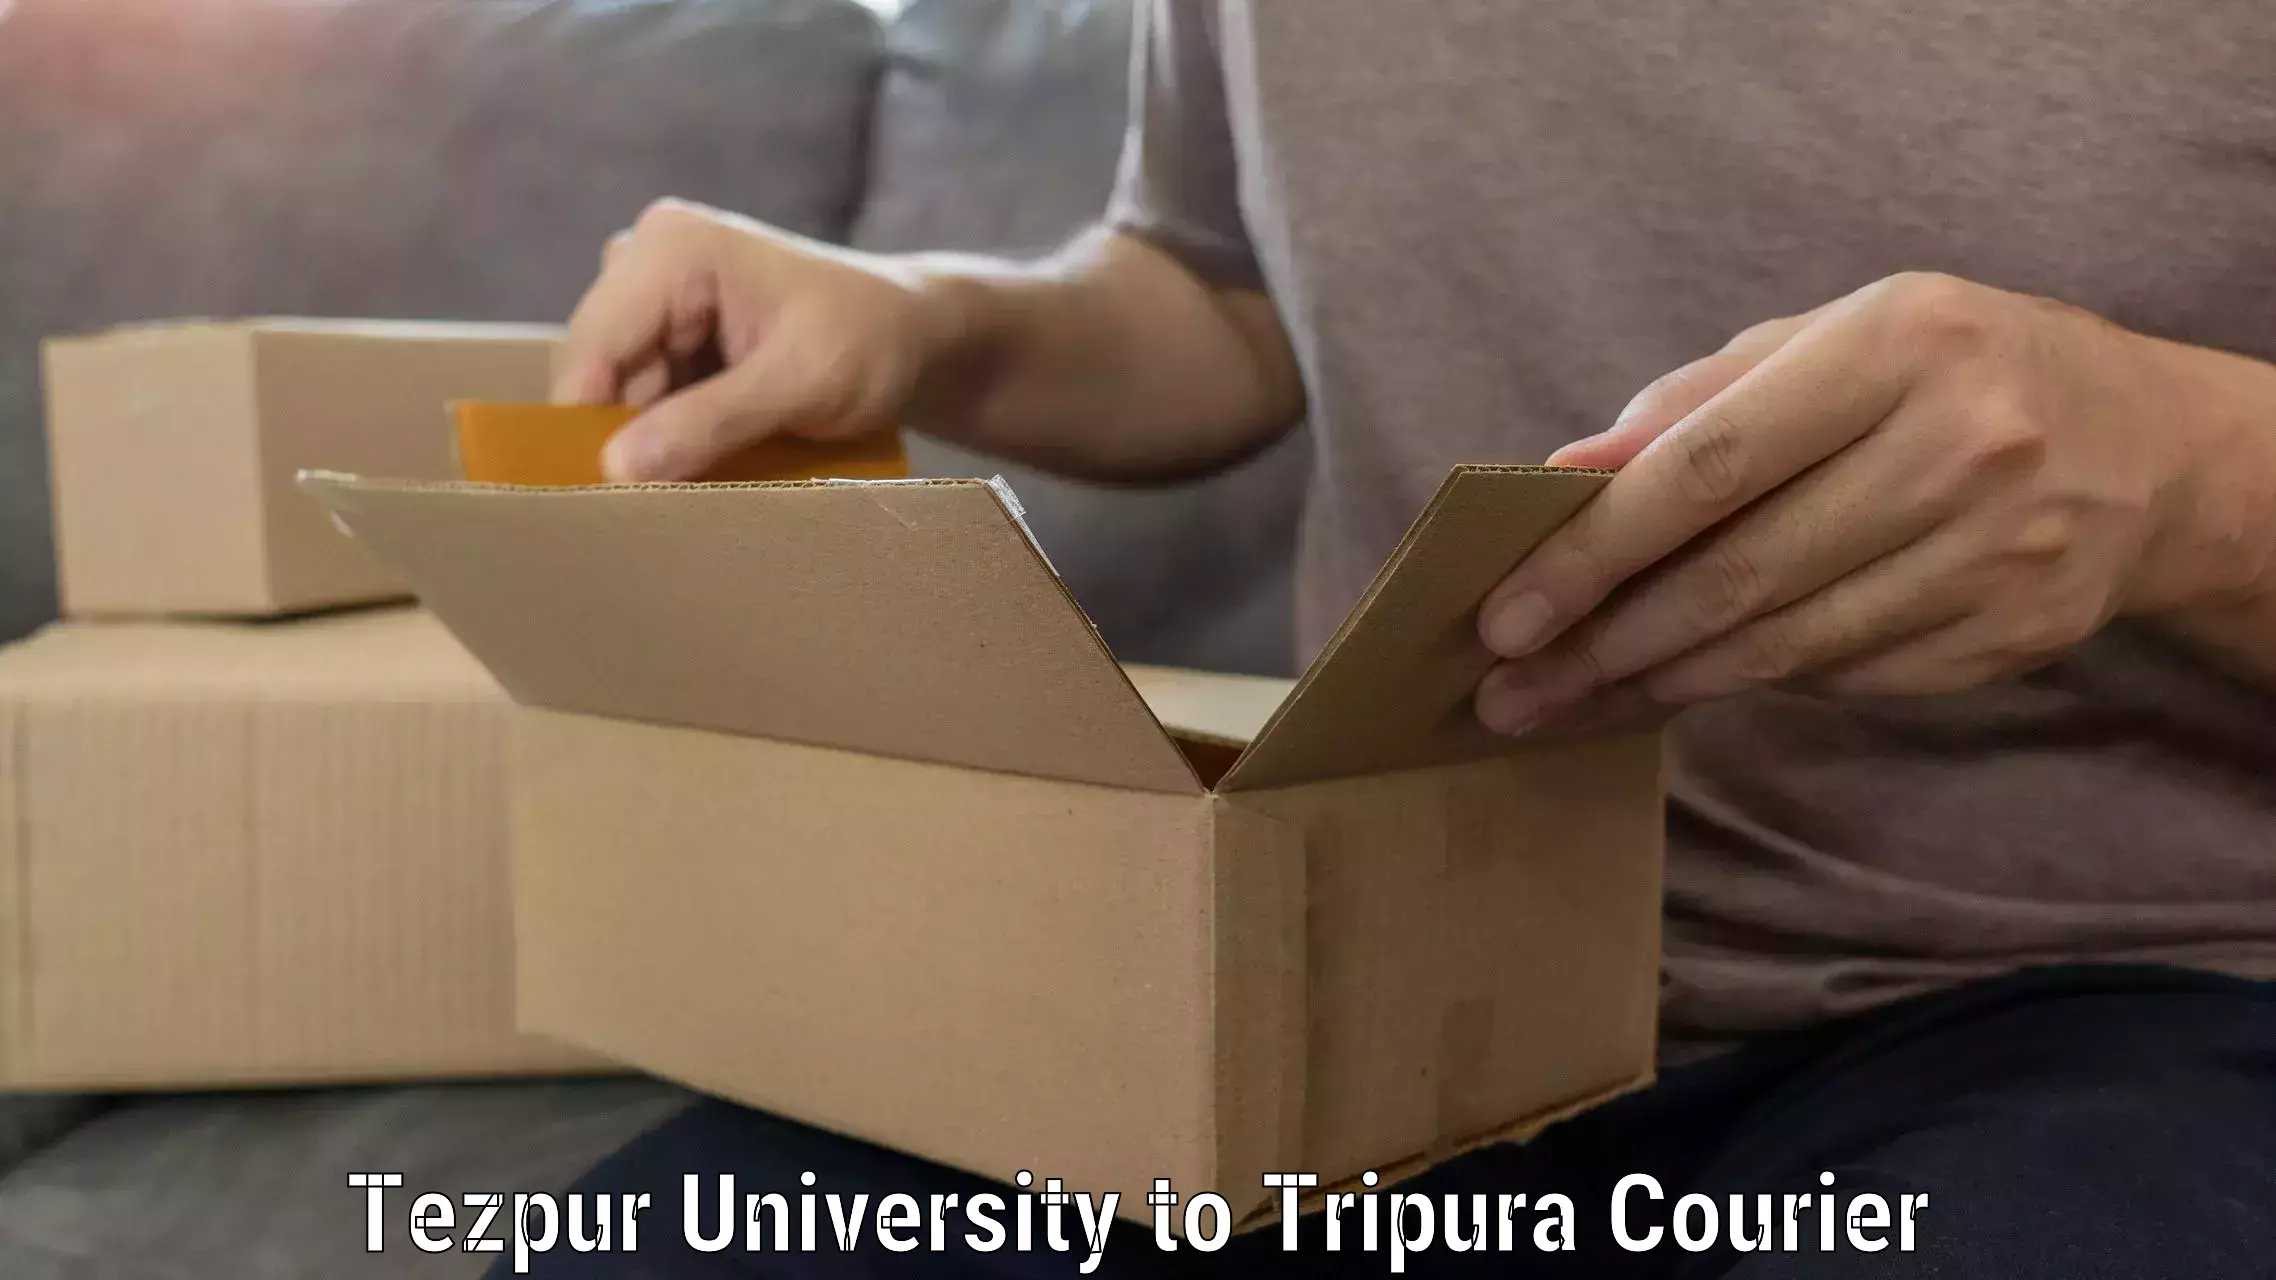 Furniture movers and packers Tezpur University to Udaipur Tripura